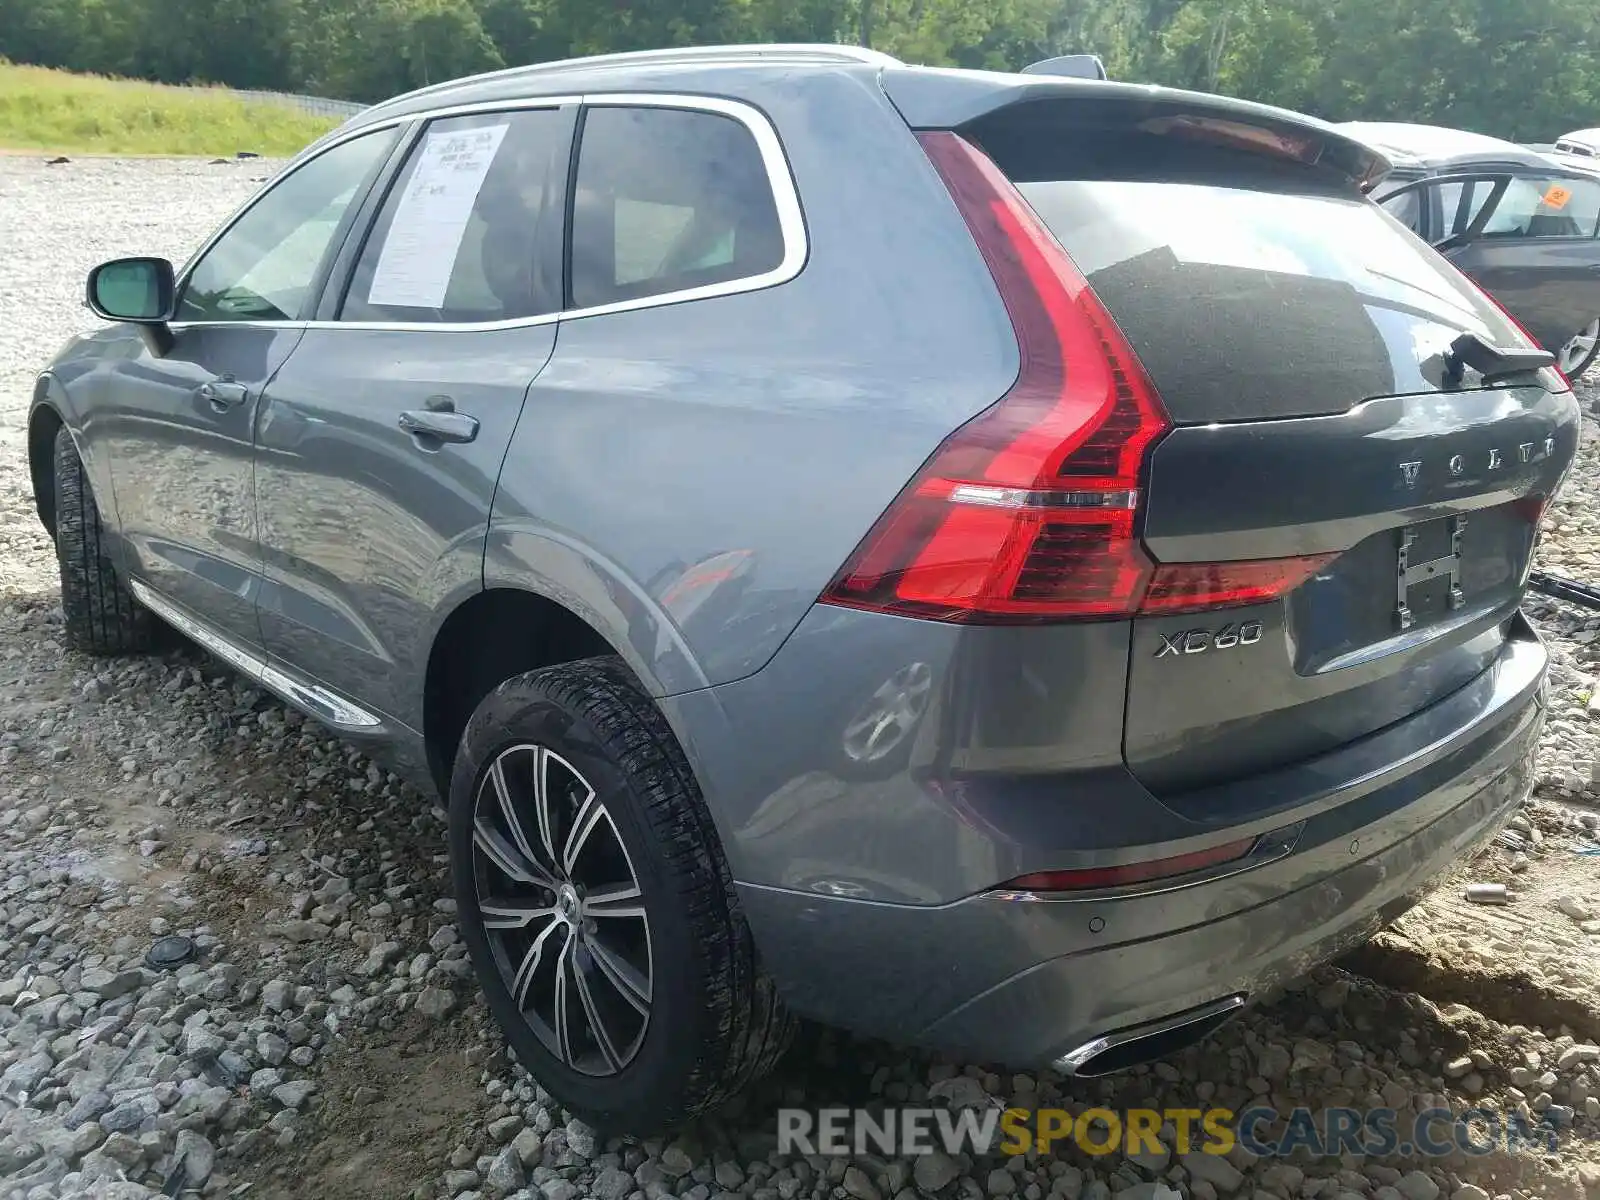 3 Photograph of a damaged car YV4102RLXL1428862 VOLVO XC60 T5 IN 2020